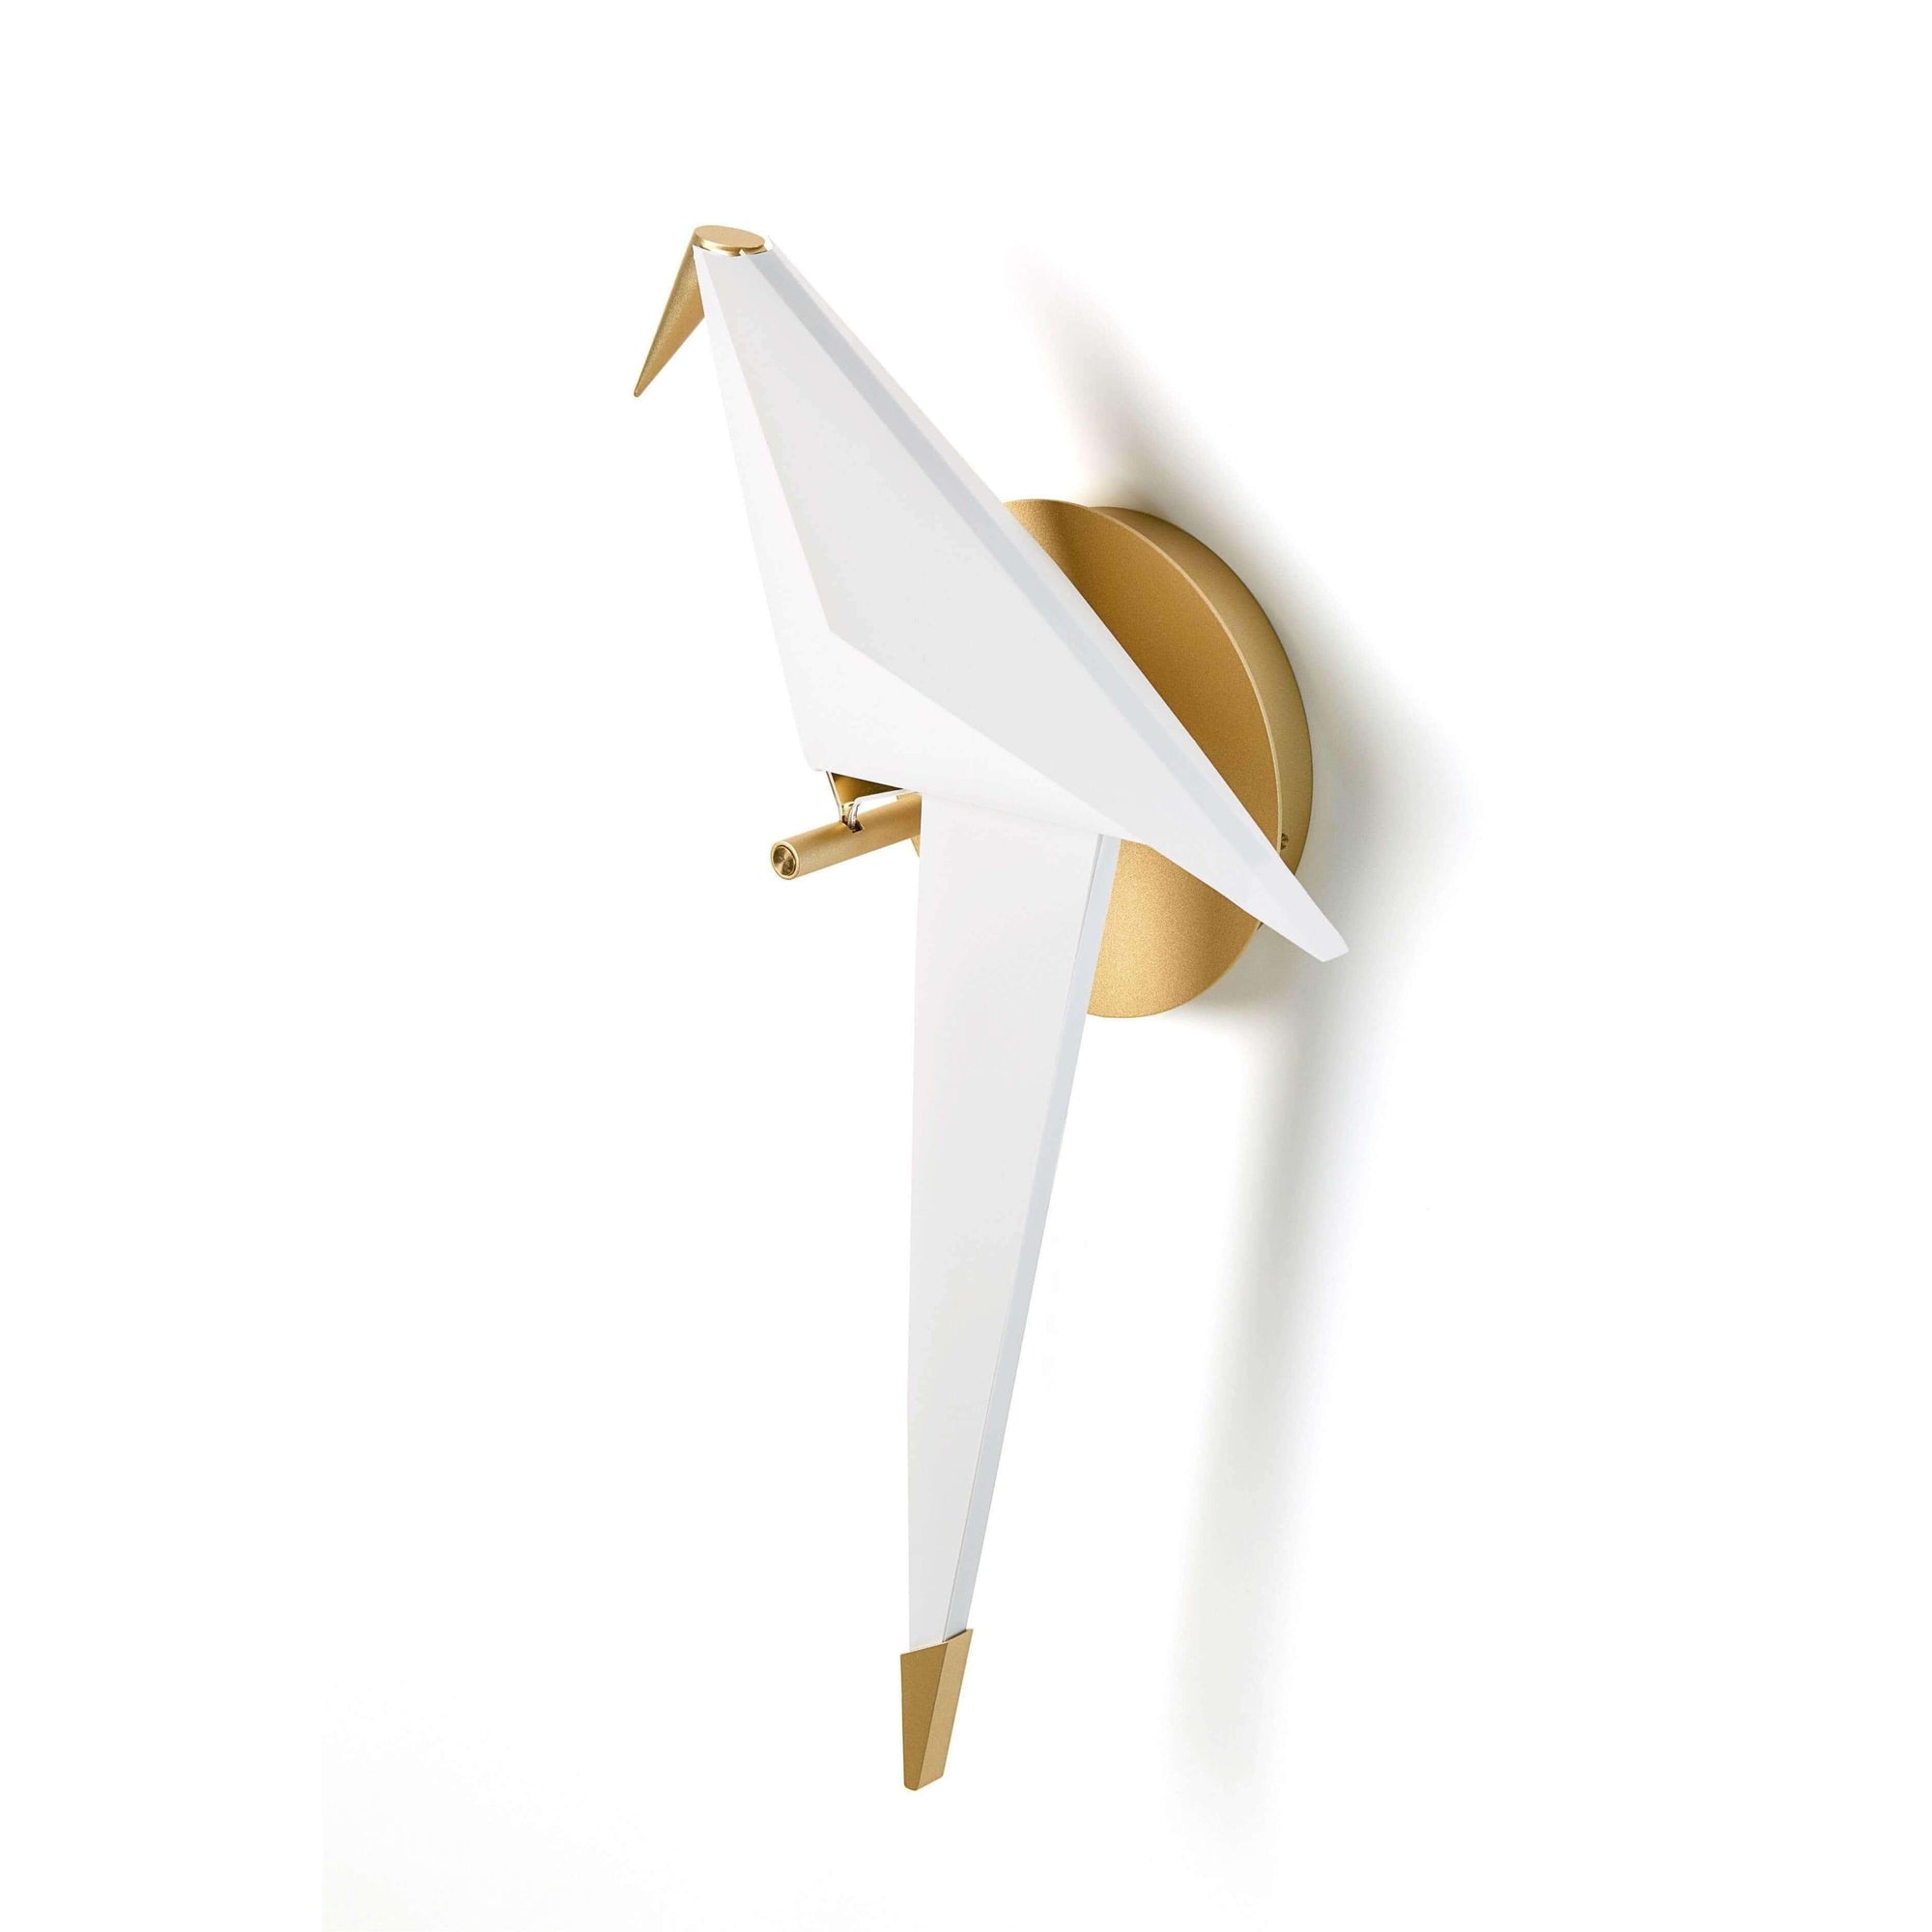 Perch Light Wall Sconce - Curated - Lighting - Moooi